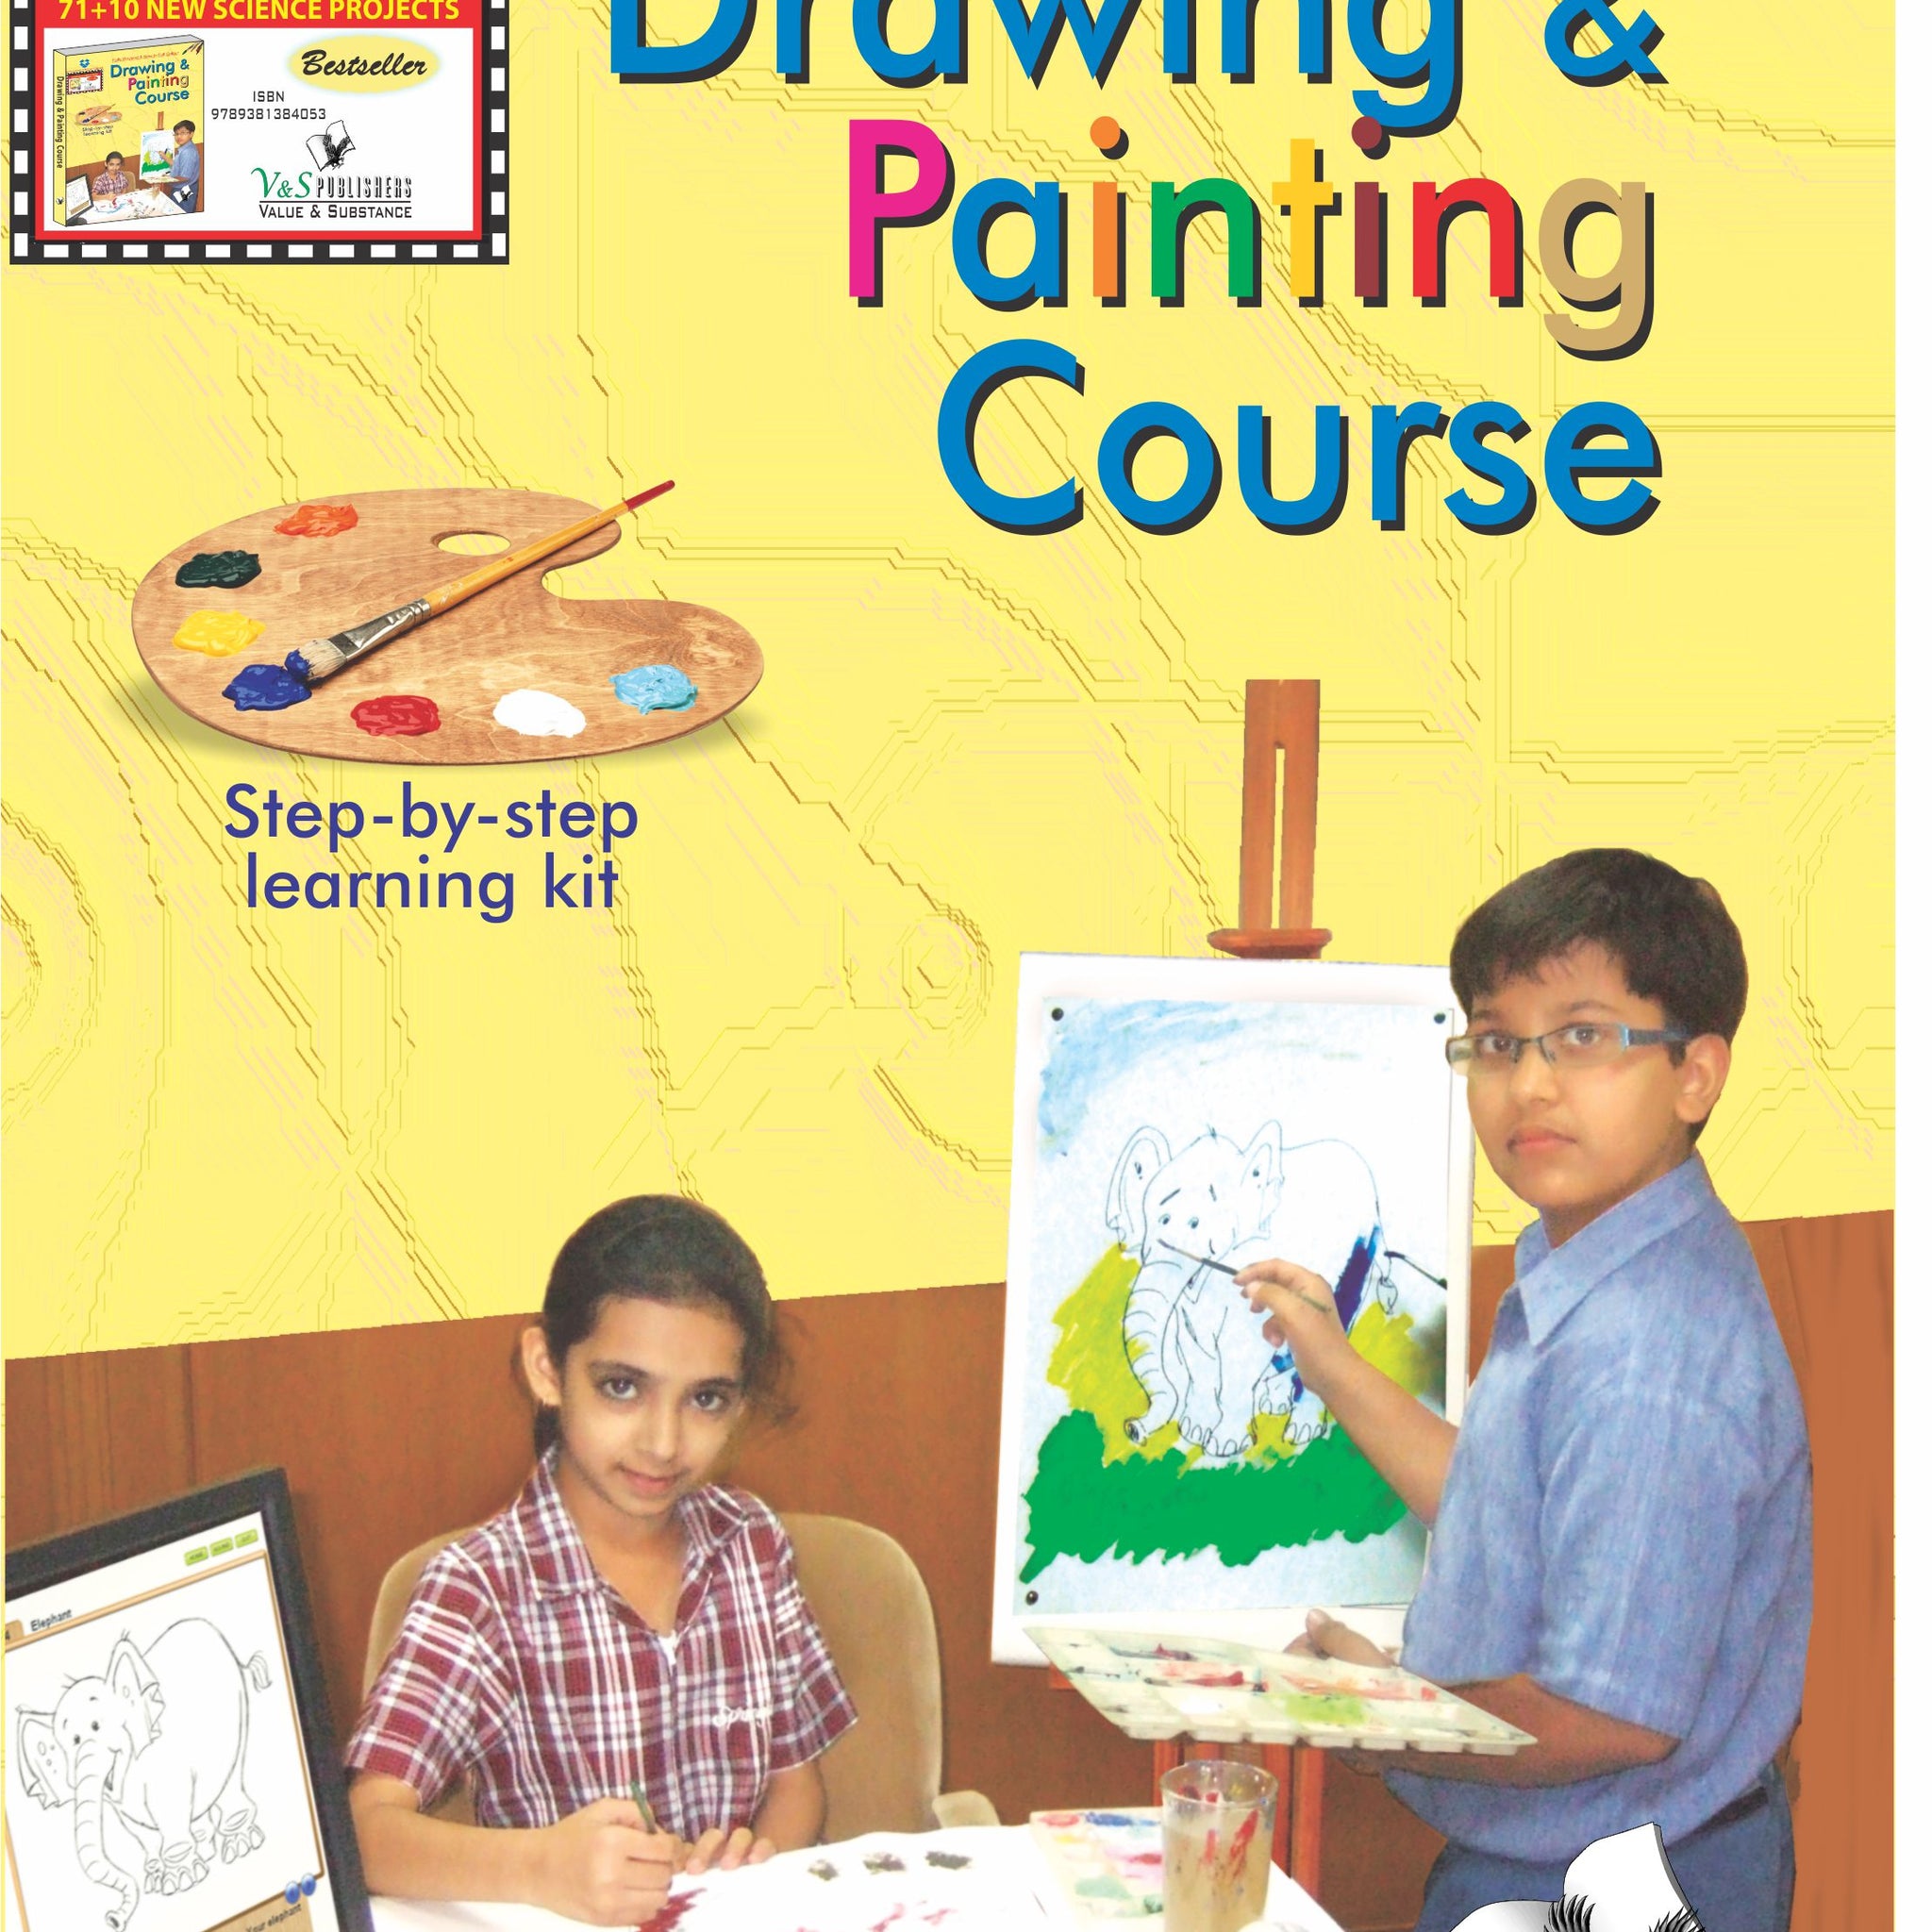 Drawing & Painting Course (With Online Content on Dropbox)